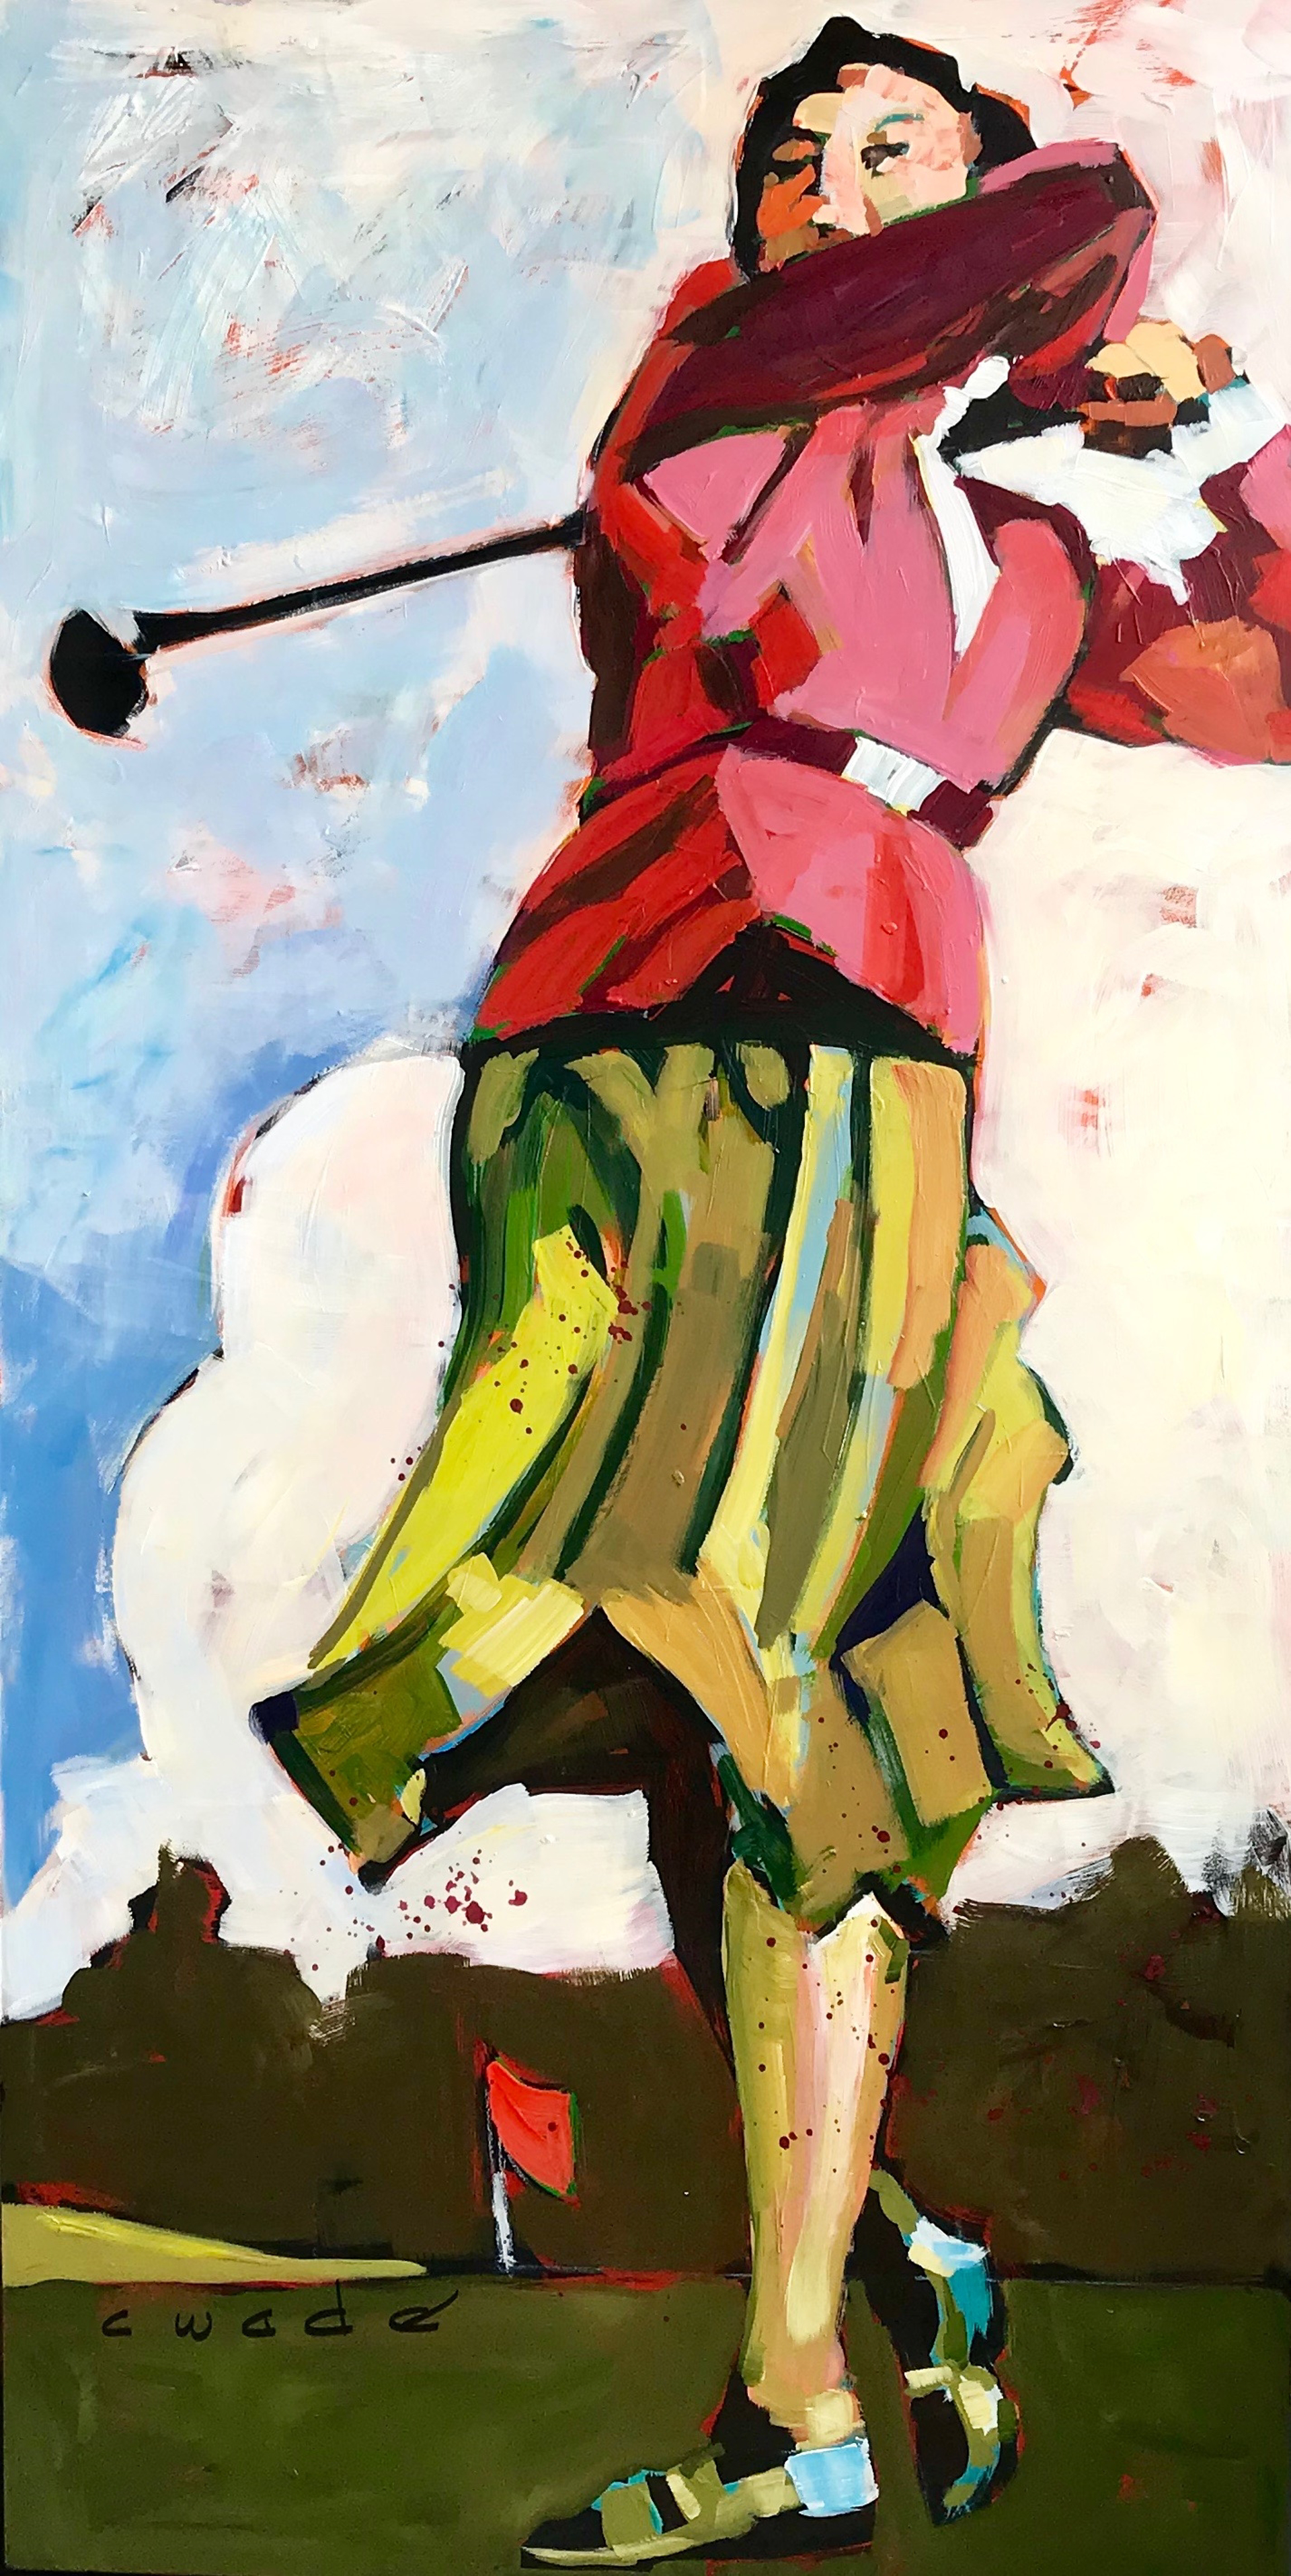 Golfer in Red Jacket by Carole Wade